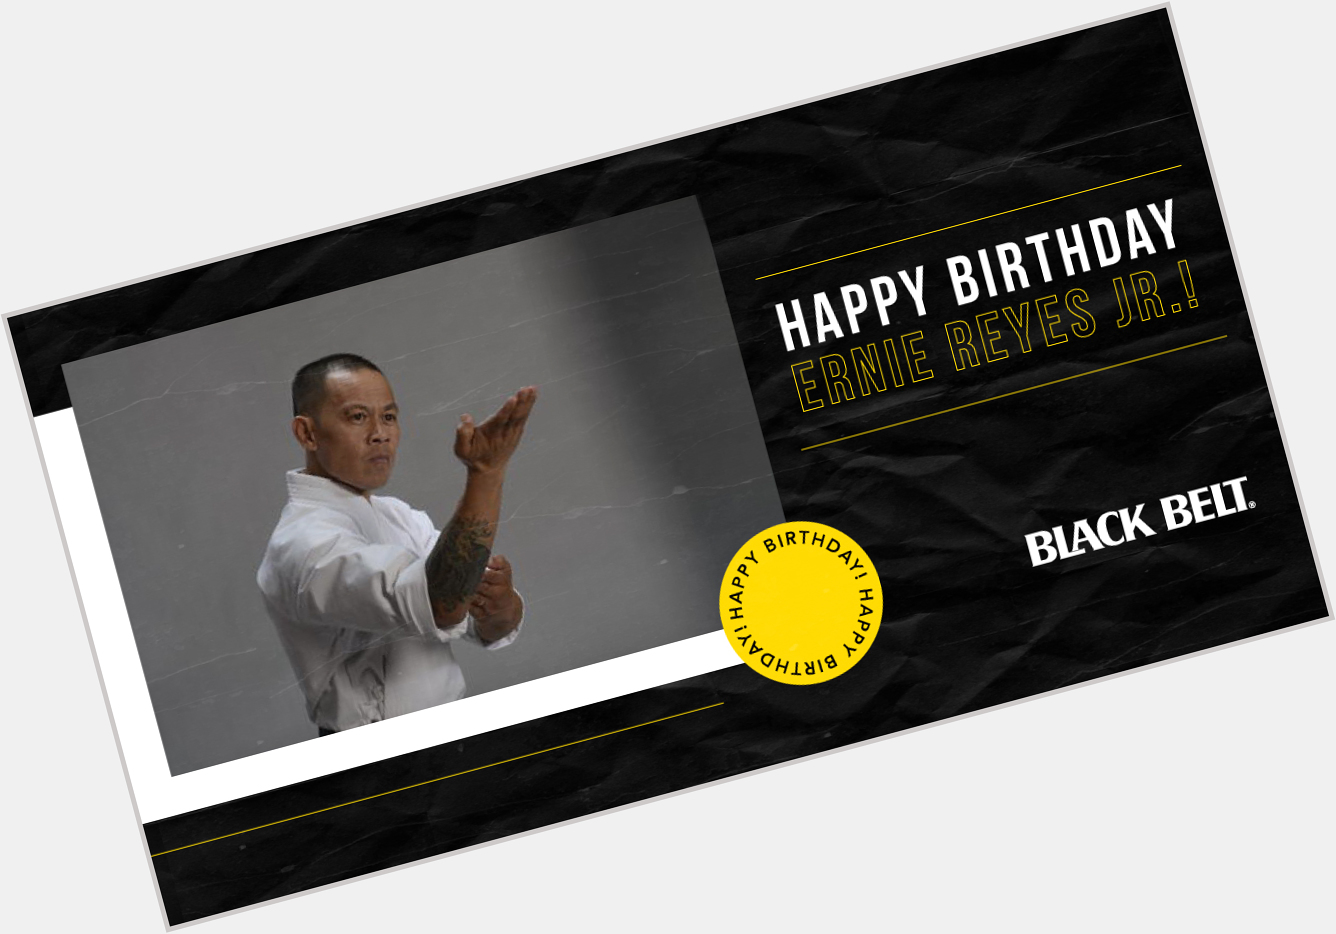 Wishing a very happy birthday to the legendary Ernie Reyes Jr. We hope you enjoy your day sir! 